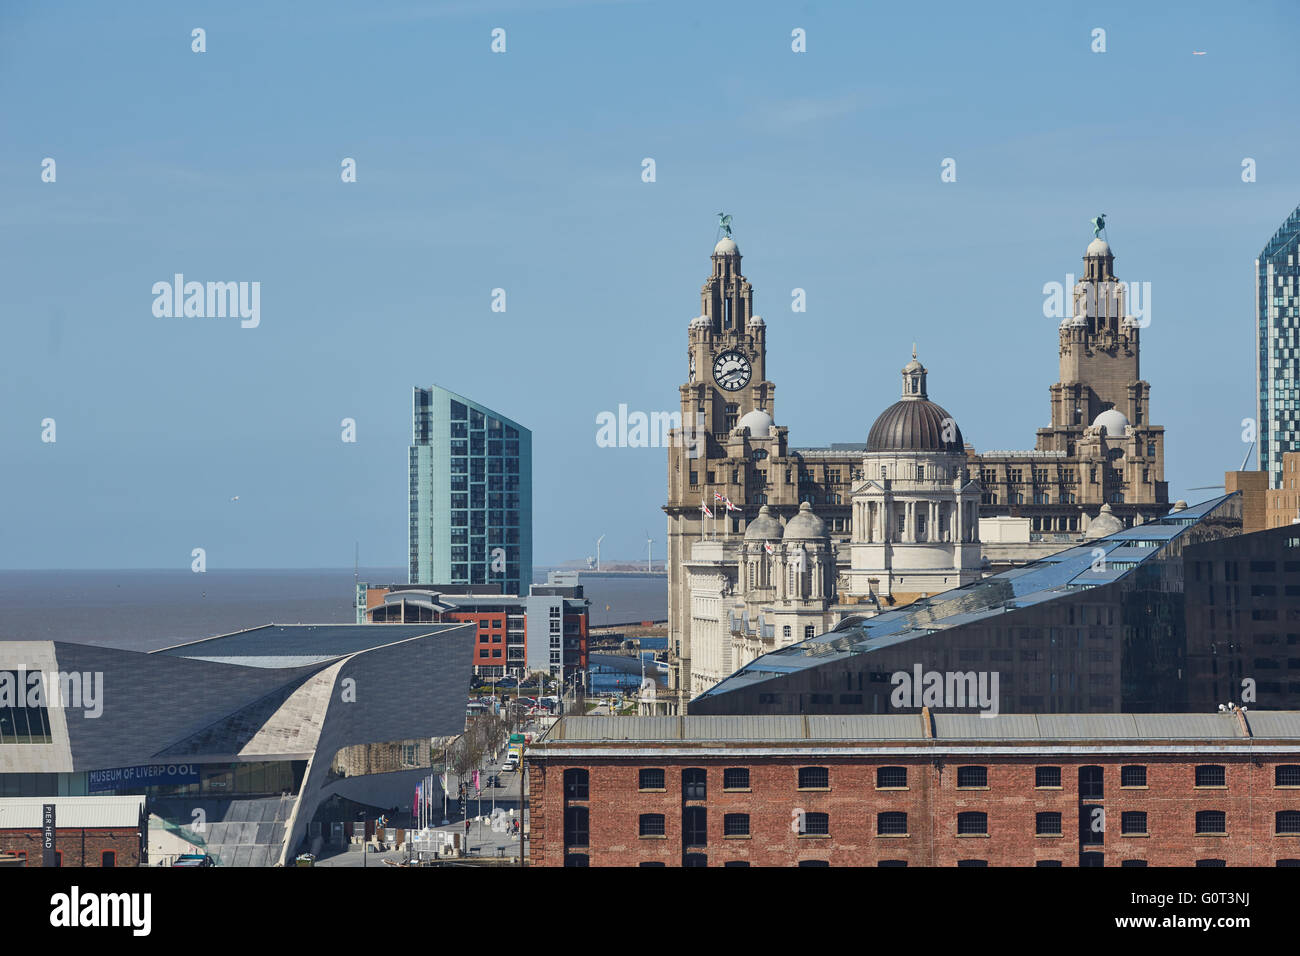 Liverpool albert dock buildings liver building    The Royal Liver Building is a Grade I listed building in Liverpool, England. I Stock Photo